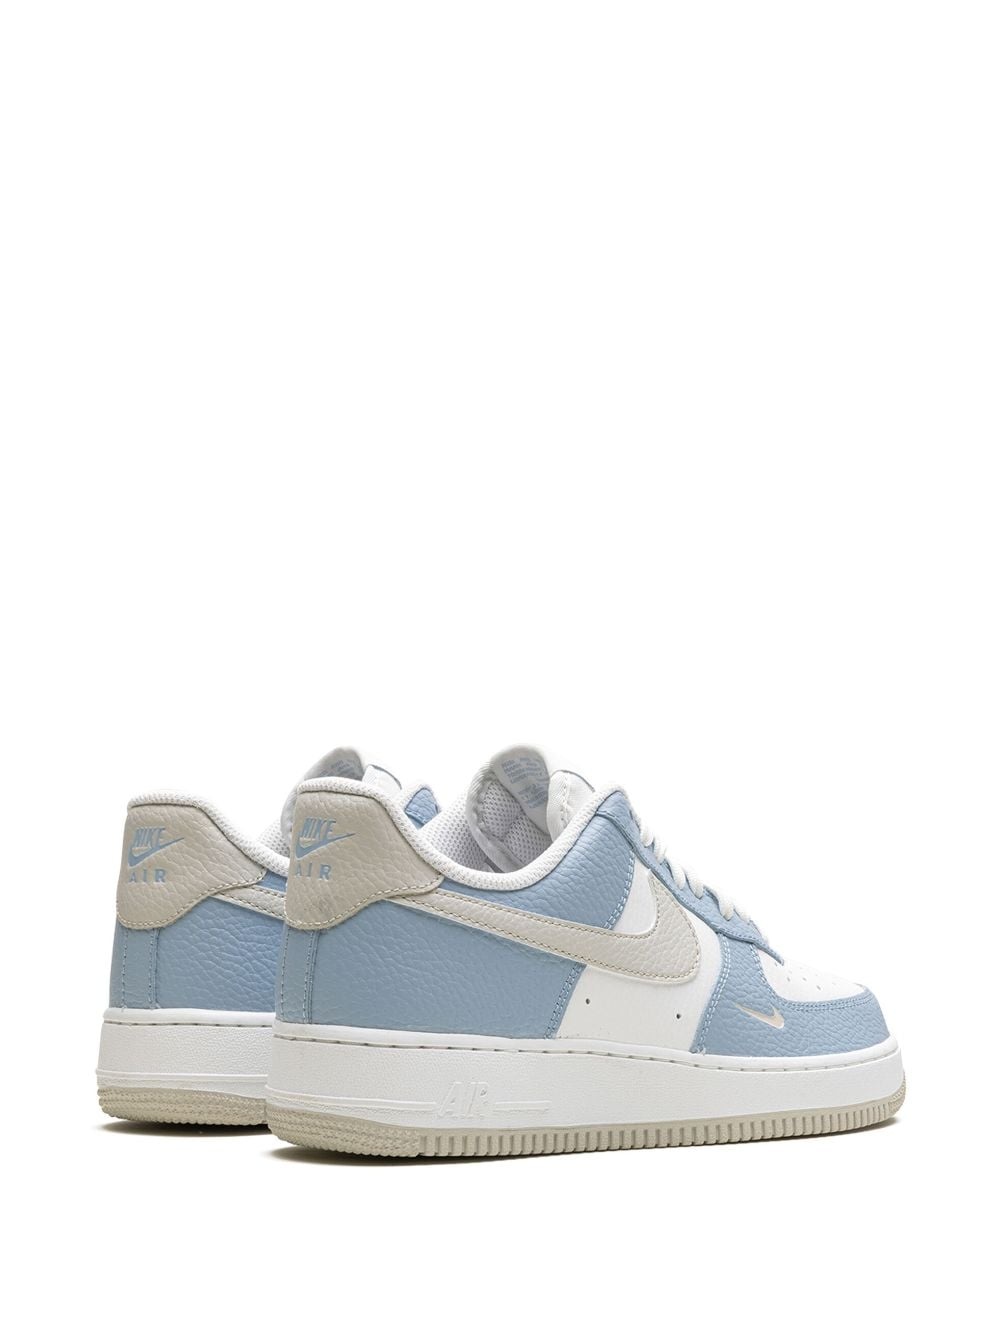 Air Force '07 "Baby Blue" sneakers - 3